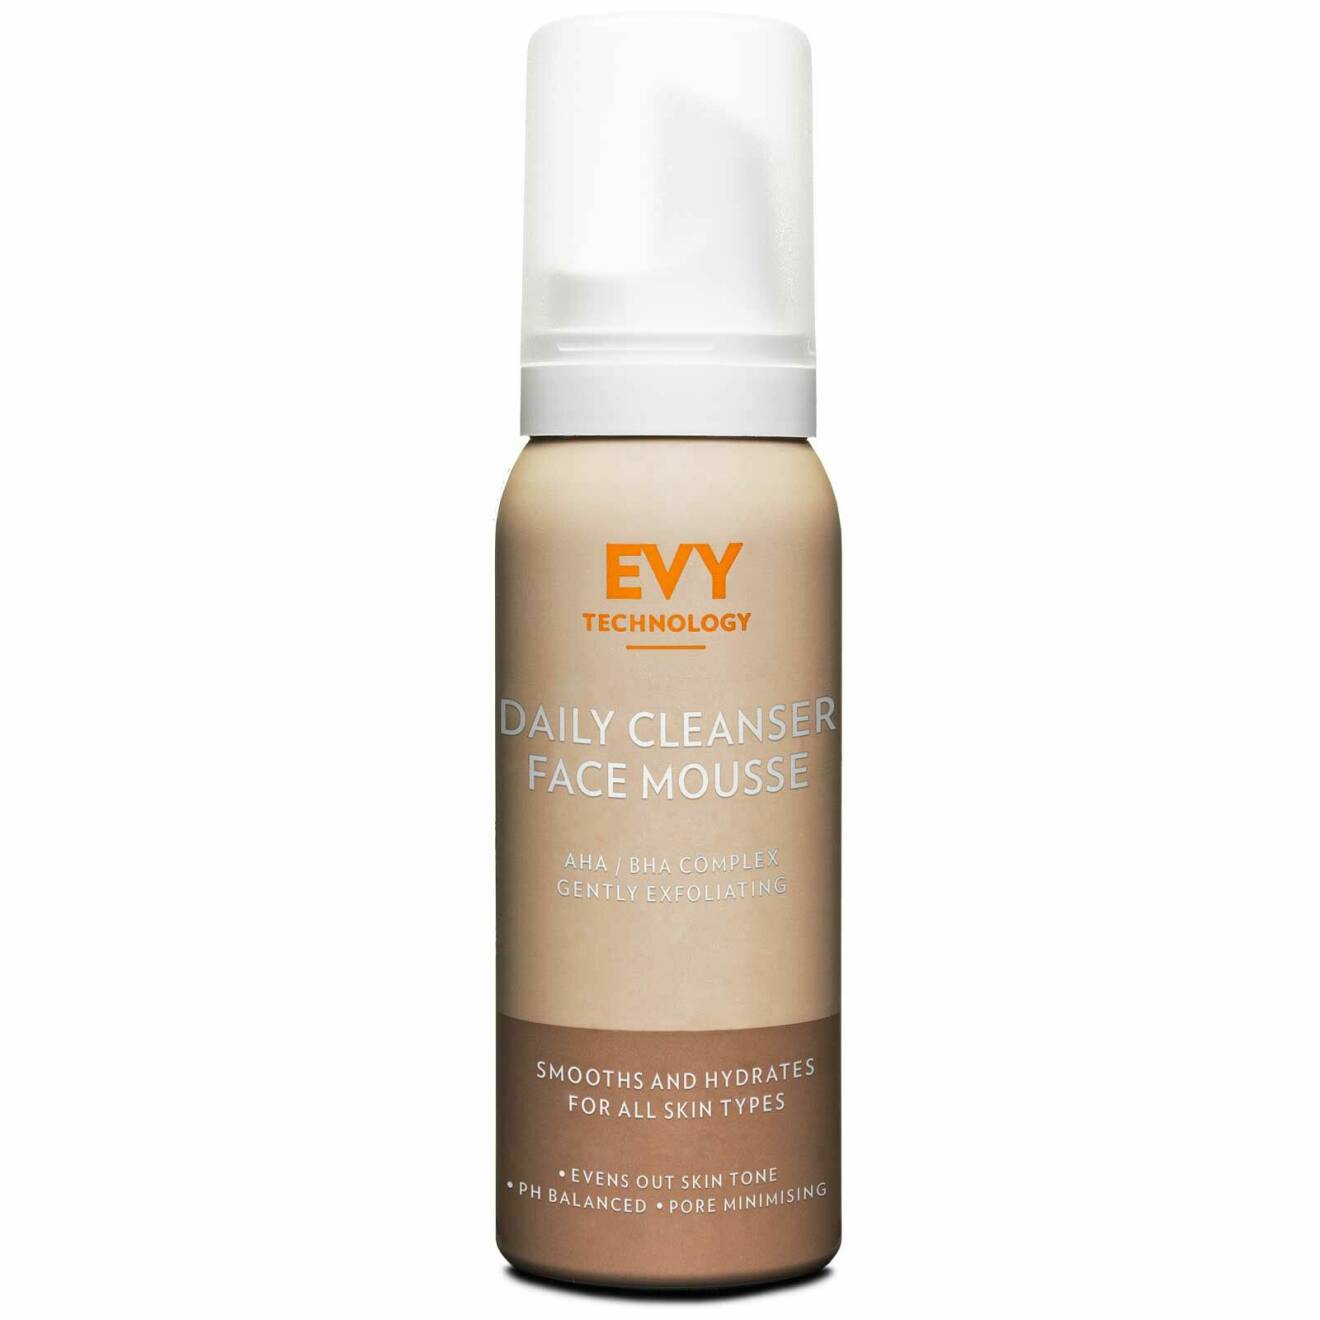 Evy Daily Cleanser Face Mousse.